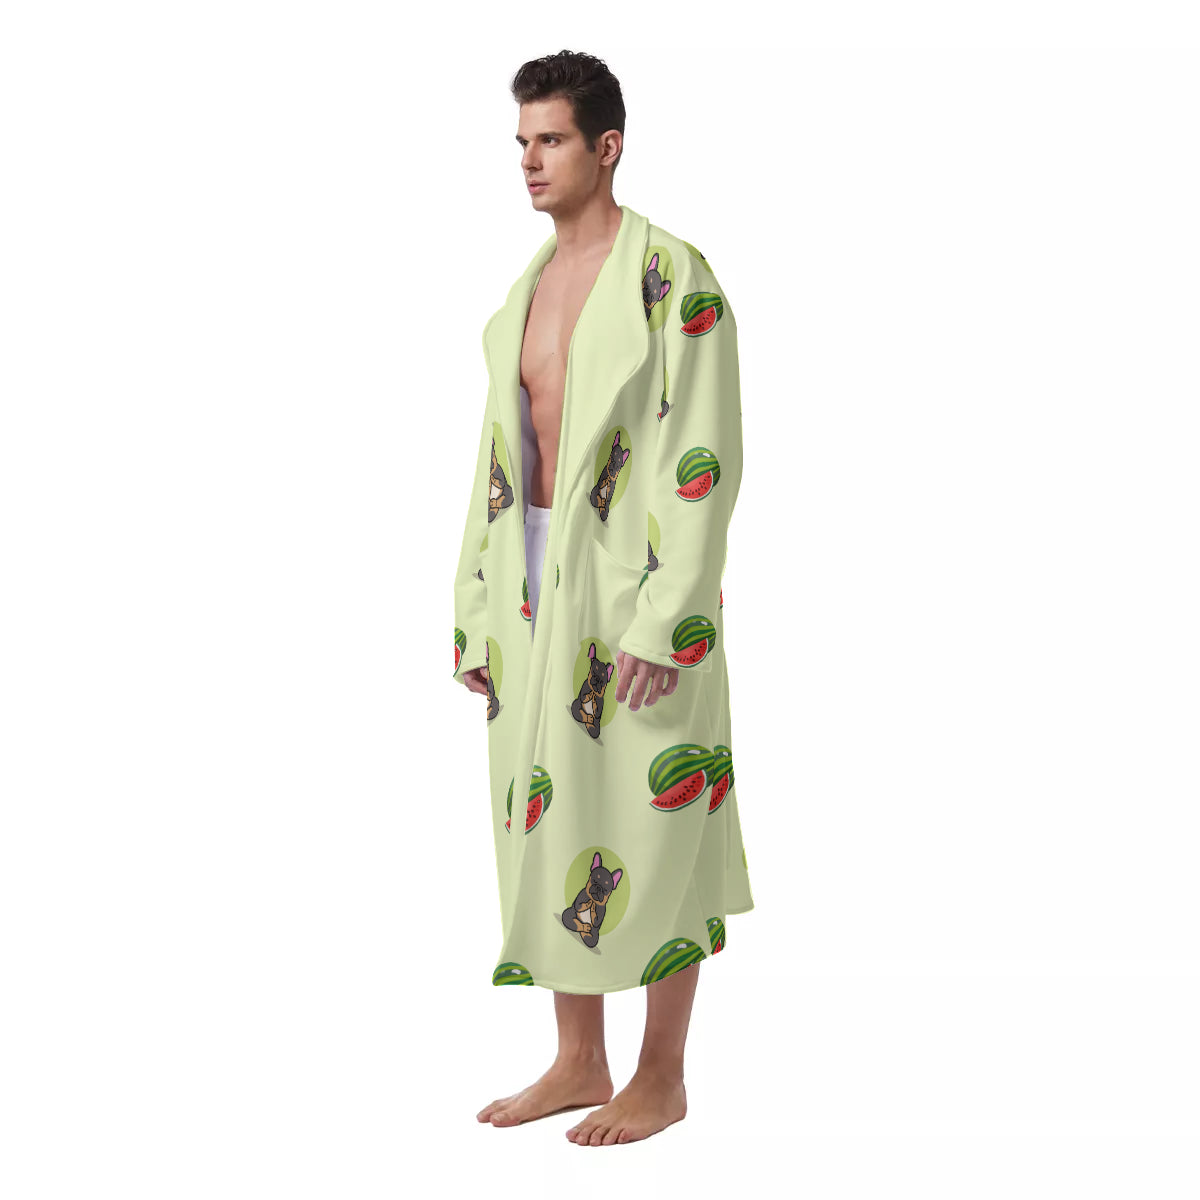 Kings of the robe: 12 of the best dressing gowns for men - in pictures |  Fashion | The Guardian